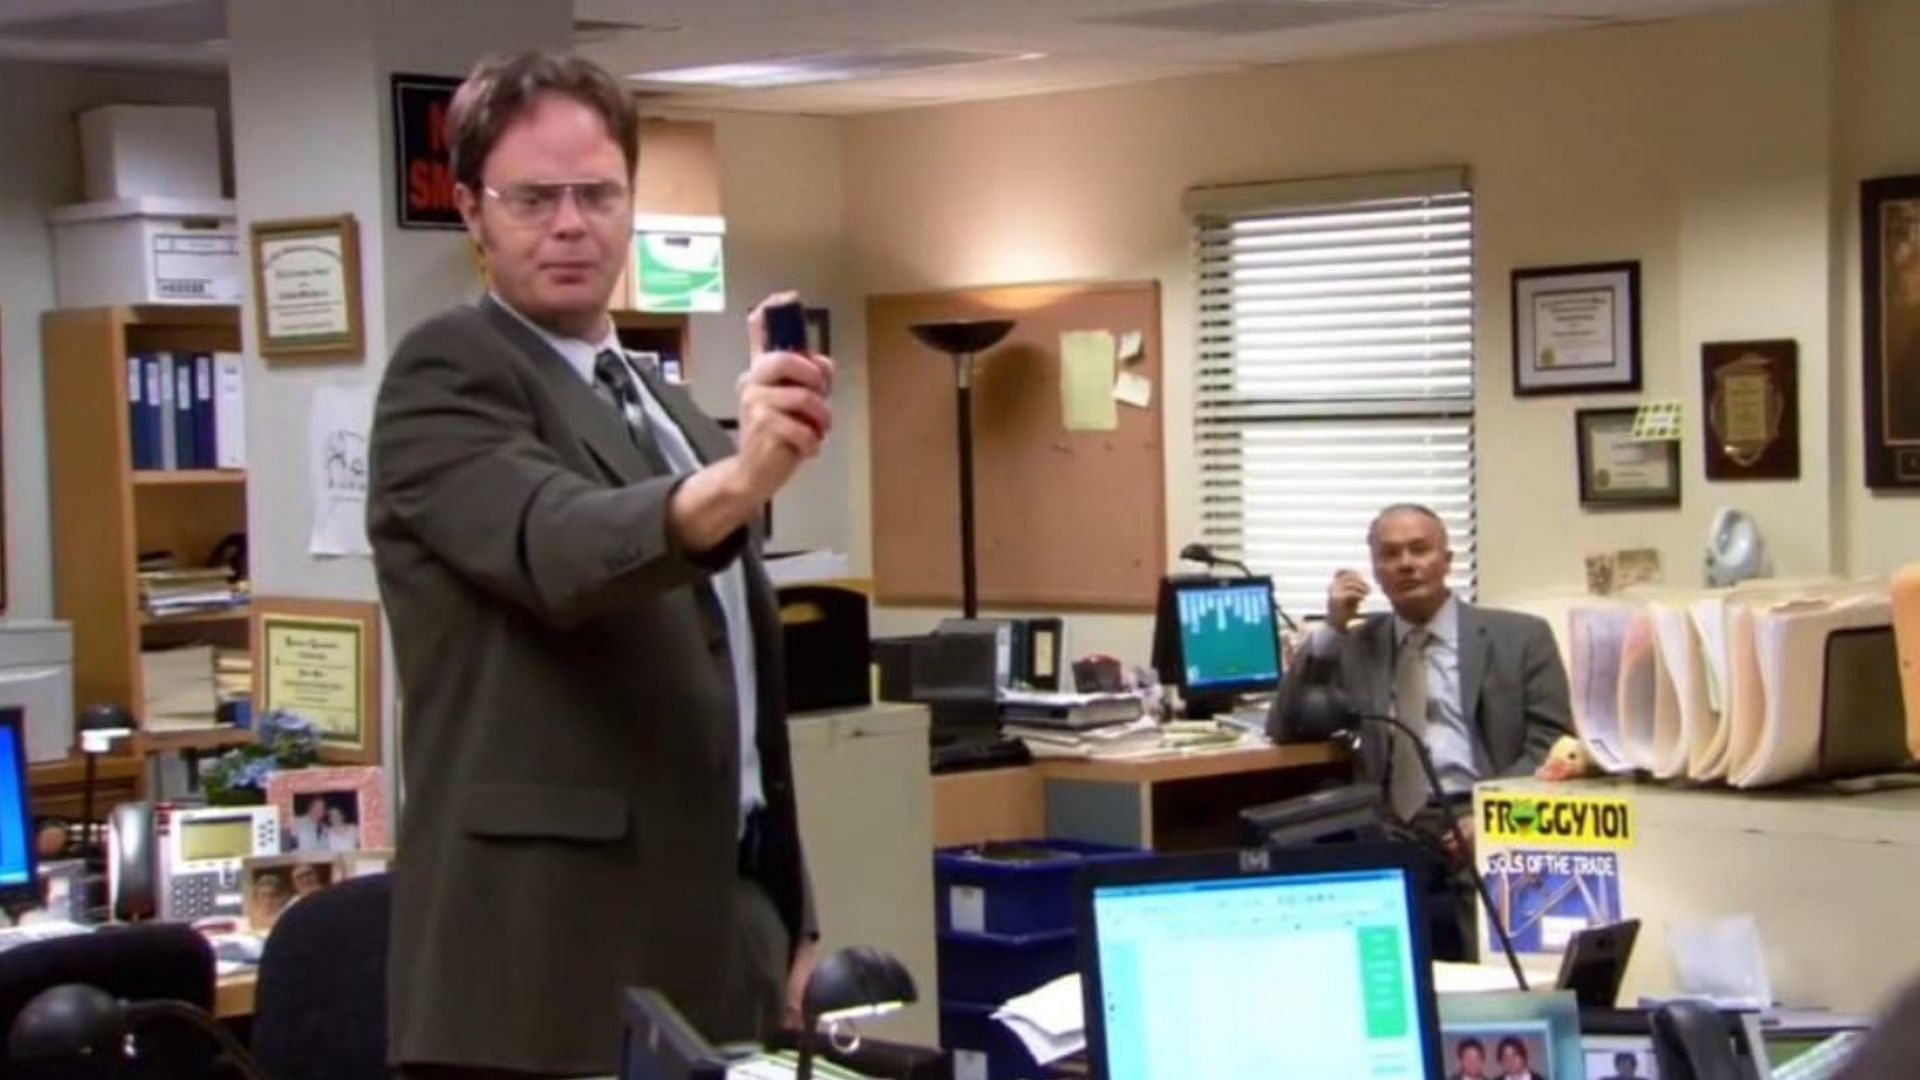 Dwight saves Jim from being attacked (Image via IMDb)